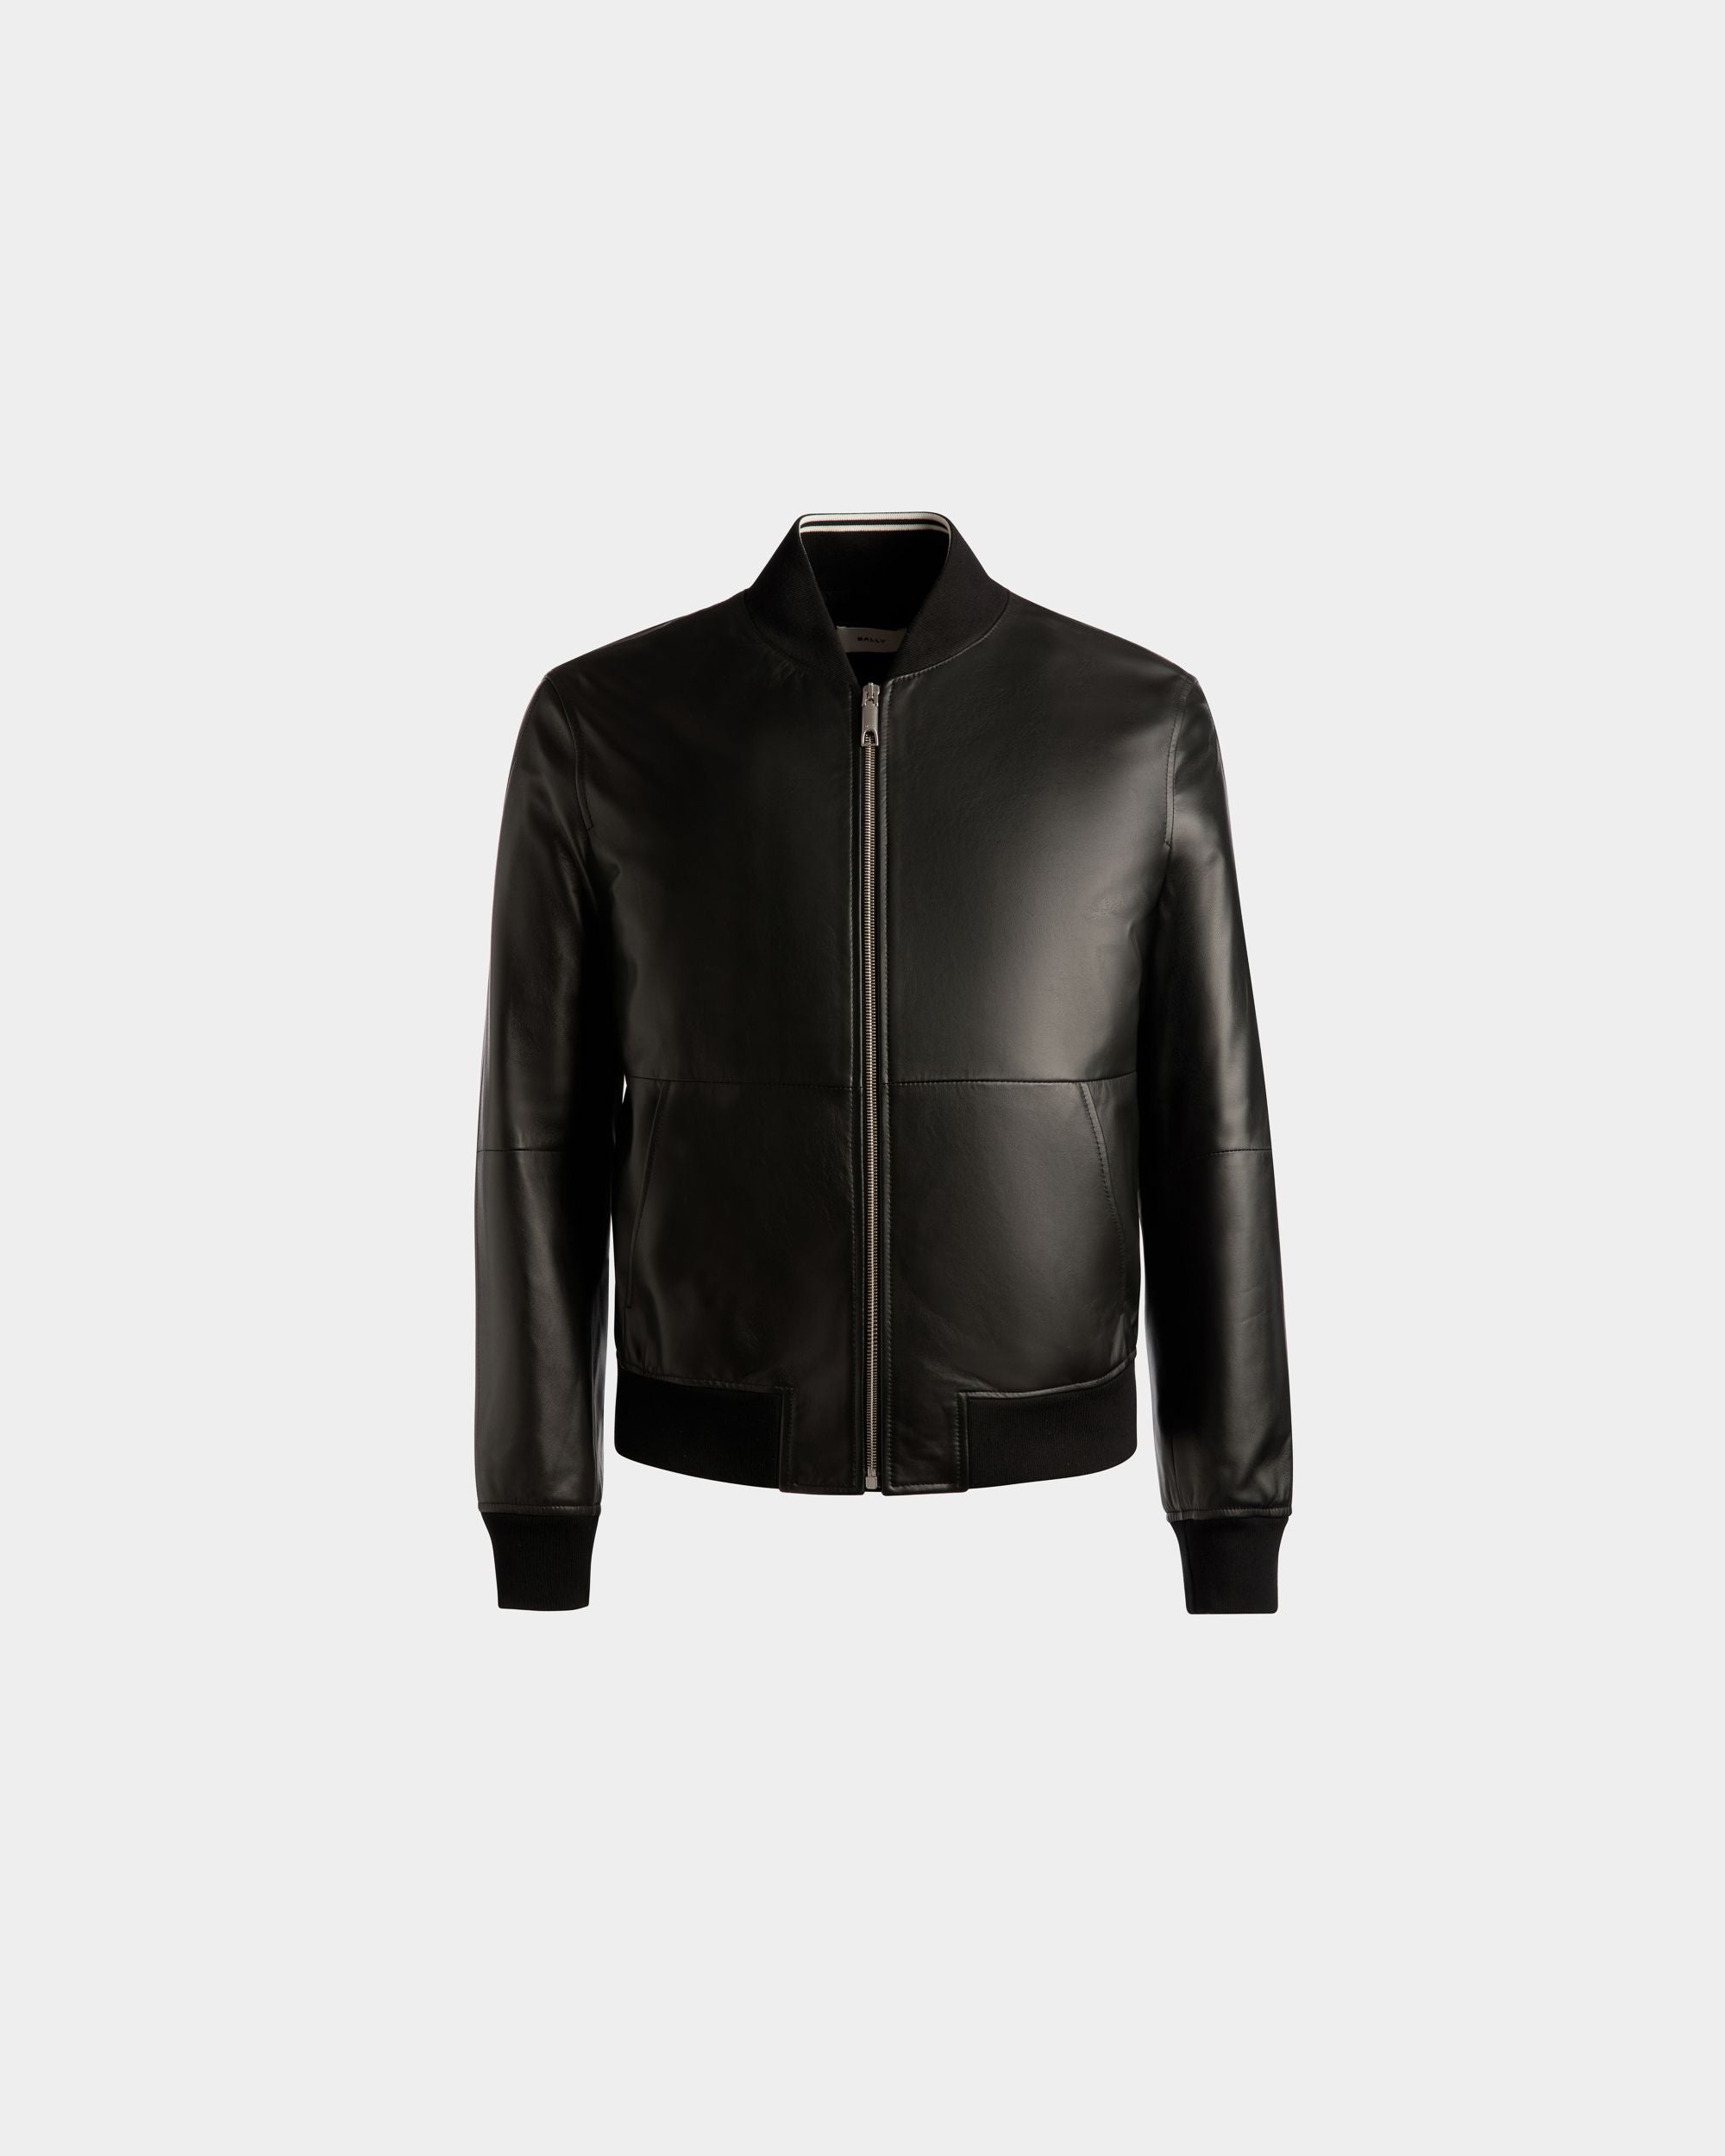 Bomber Jacket | Men's Outerwear | Black Leather | Bally | Still Life Front